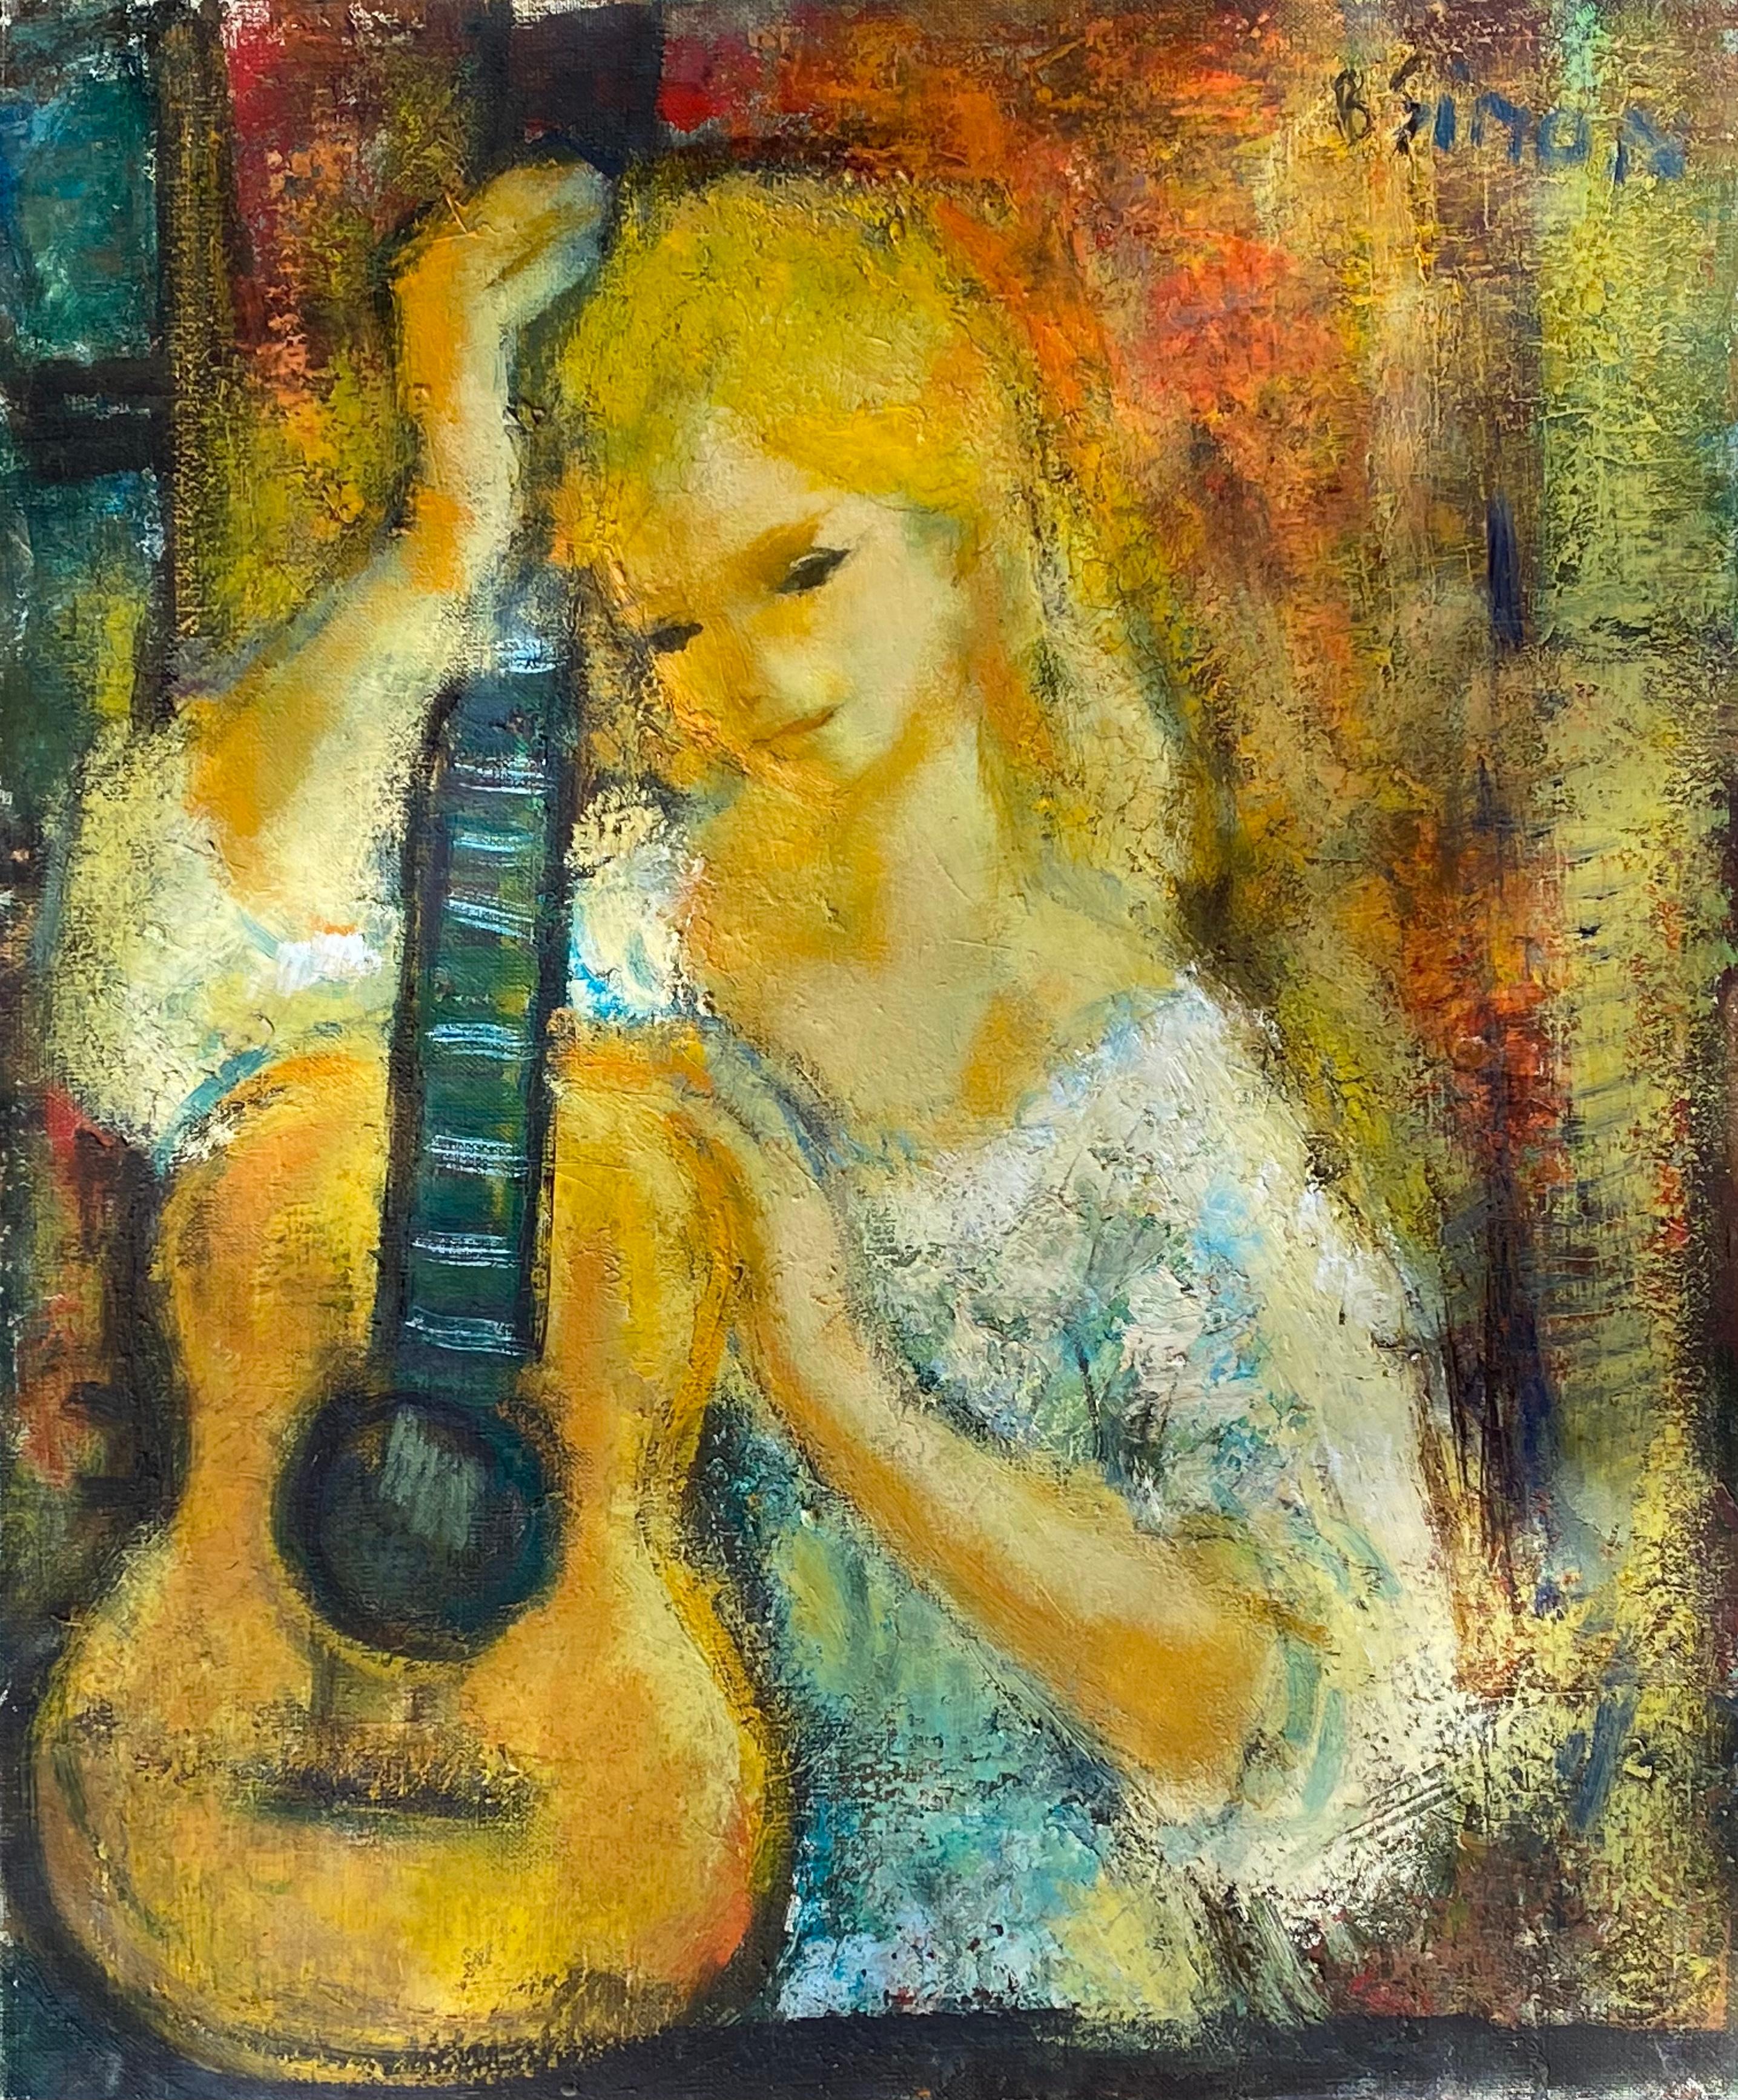 “Girl with Guitar”